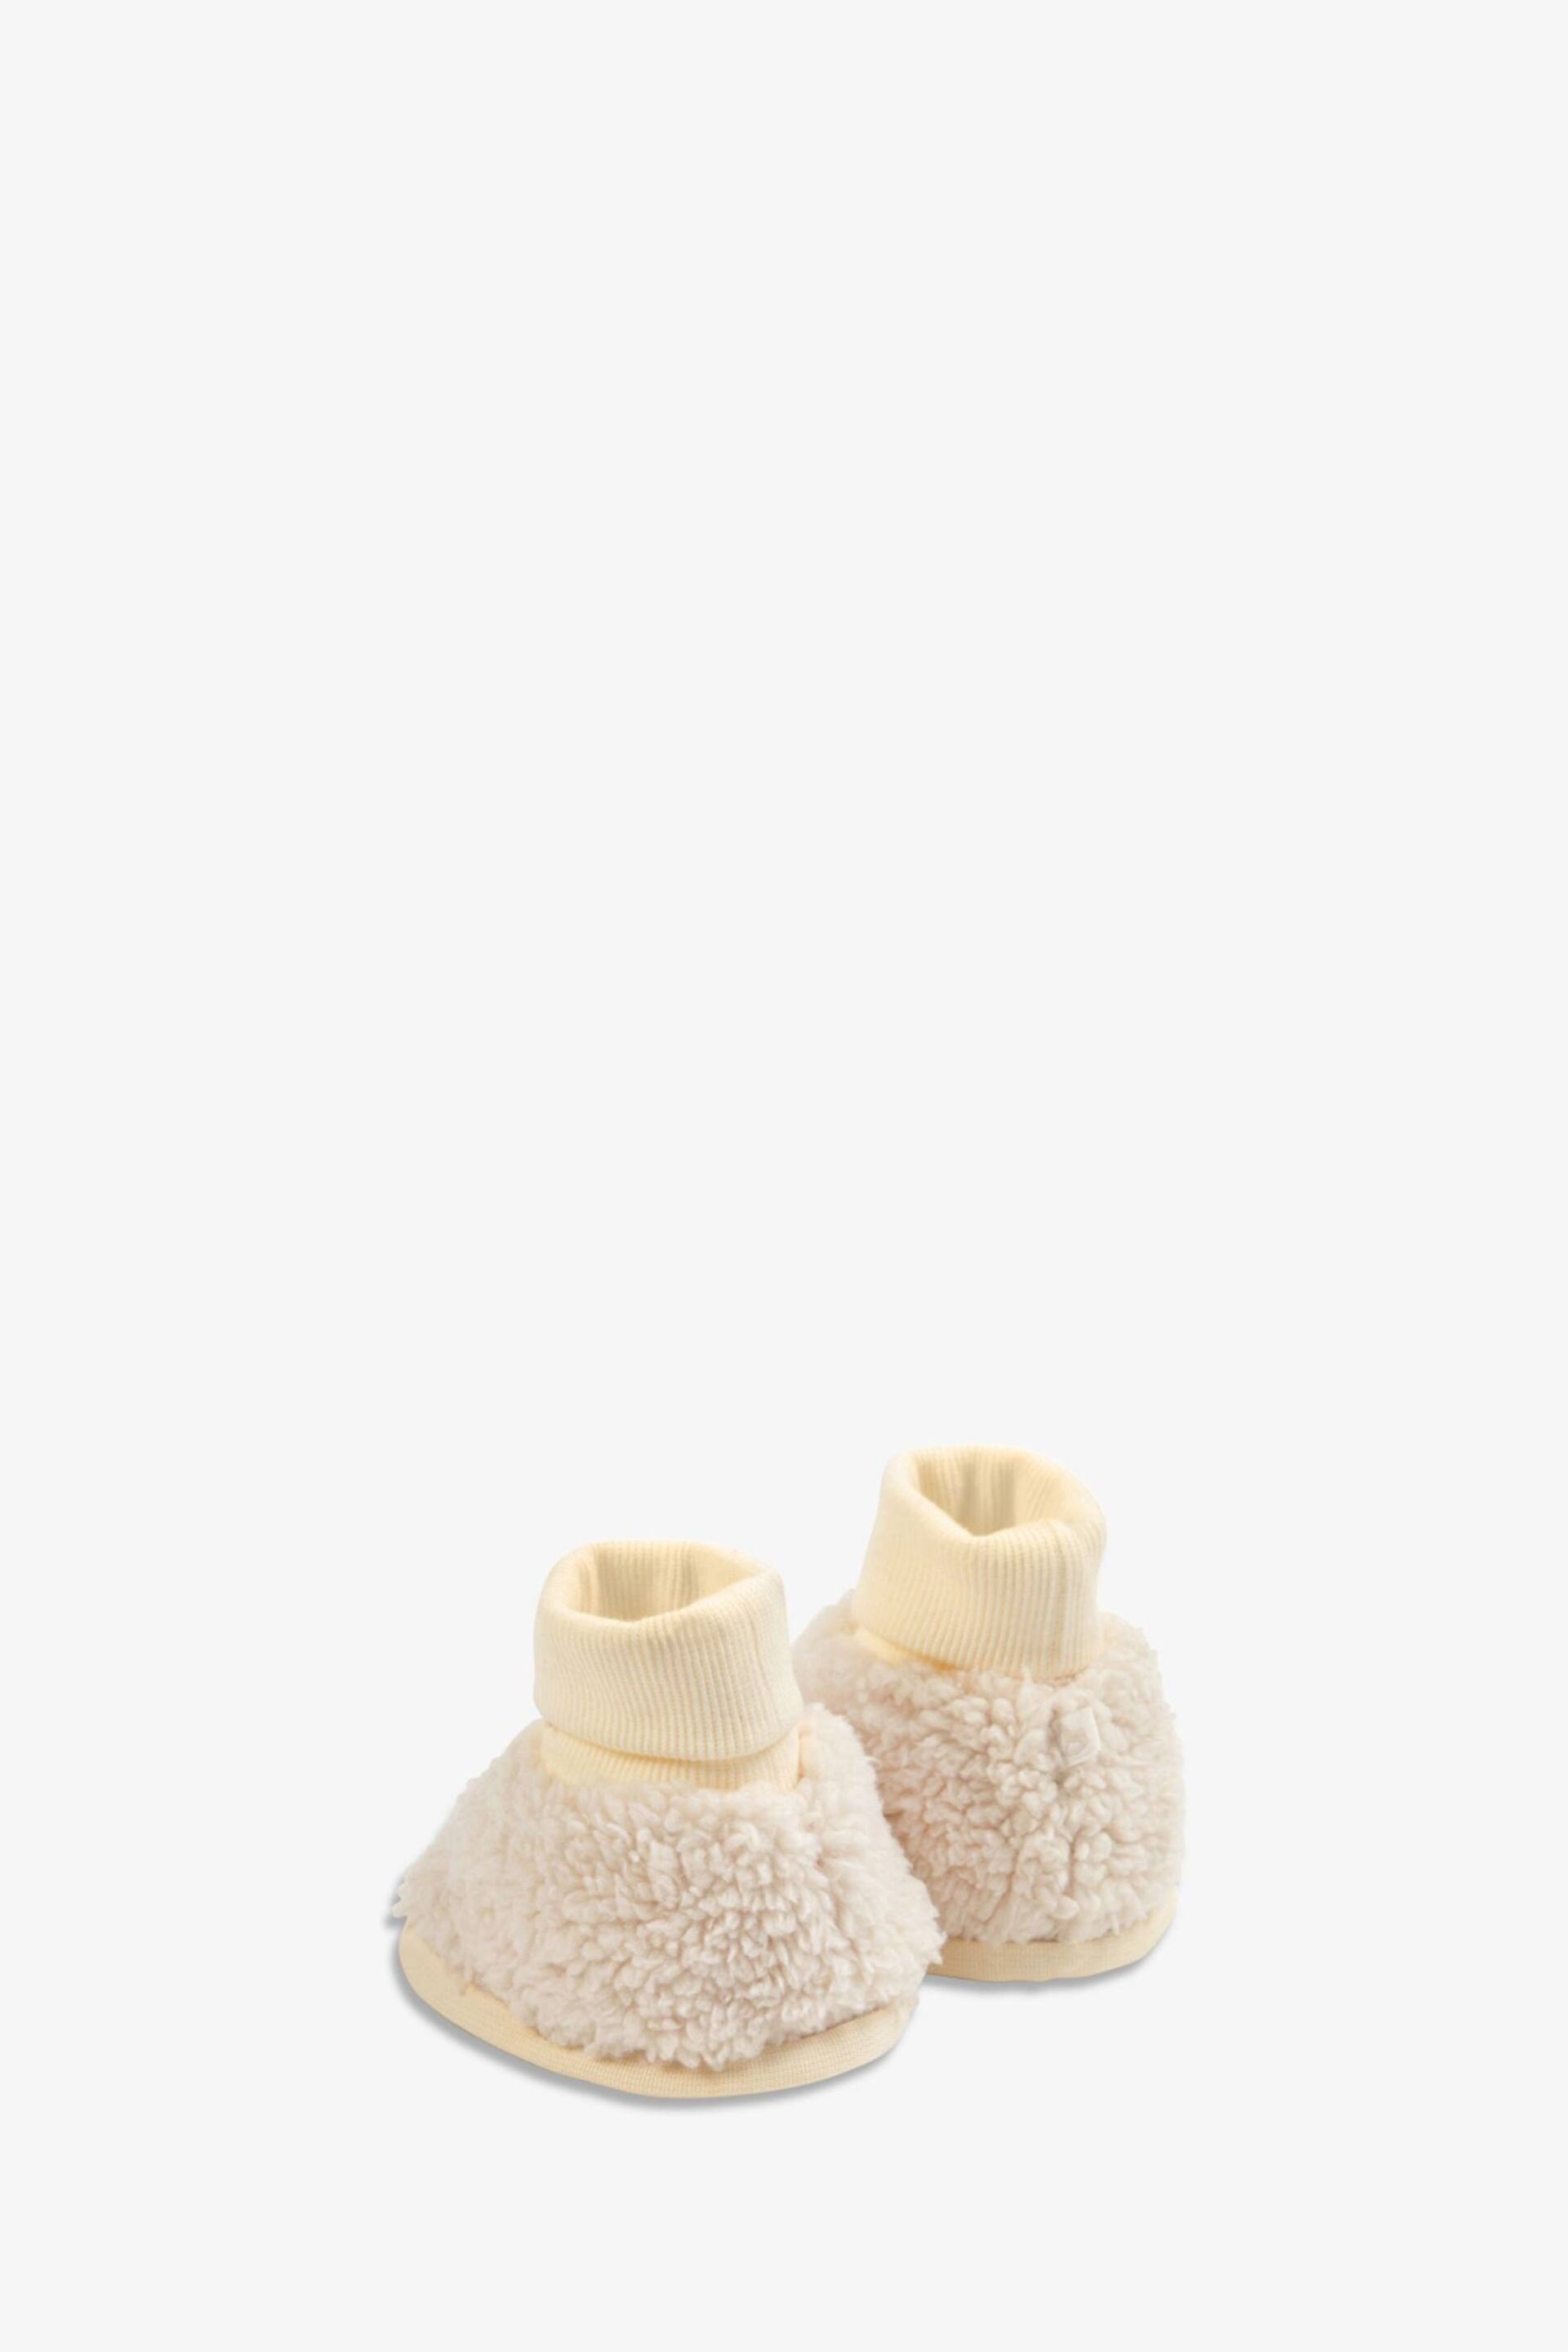 The Little Tailor Plush Lined Sherpa Fleece Borg Baby Booties - Image 3 of 4